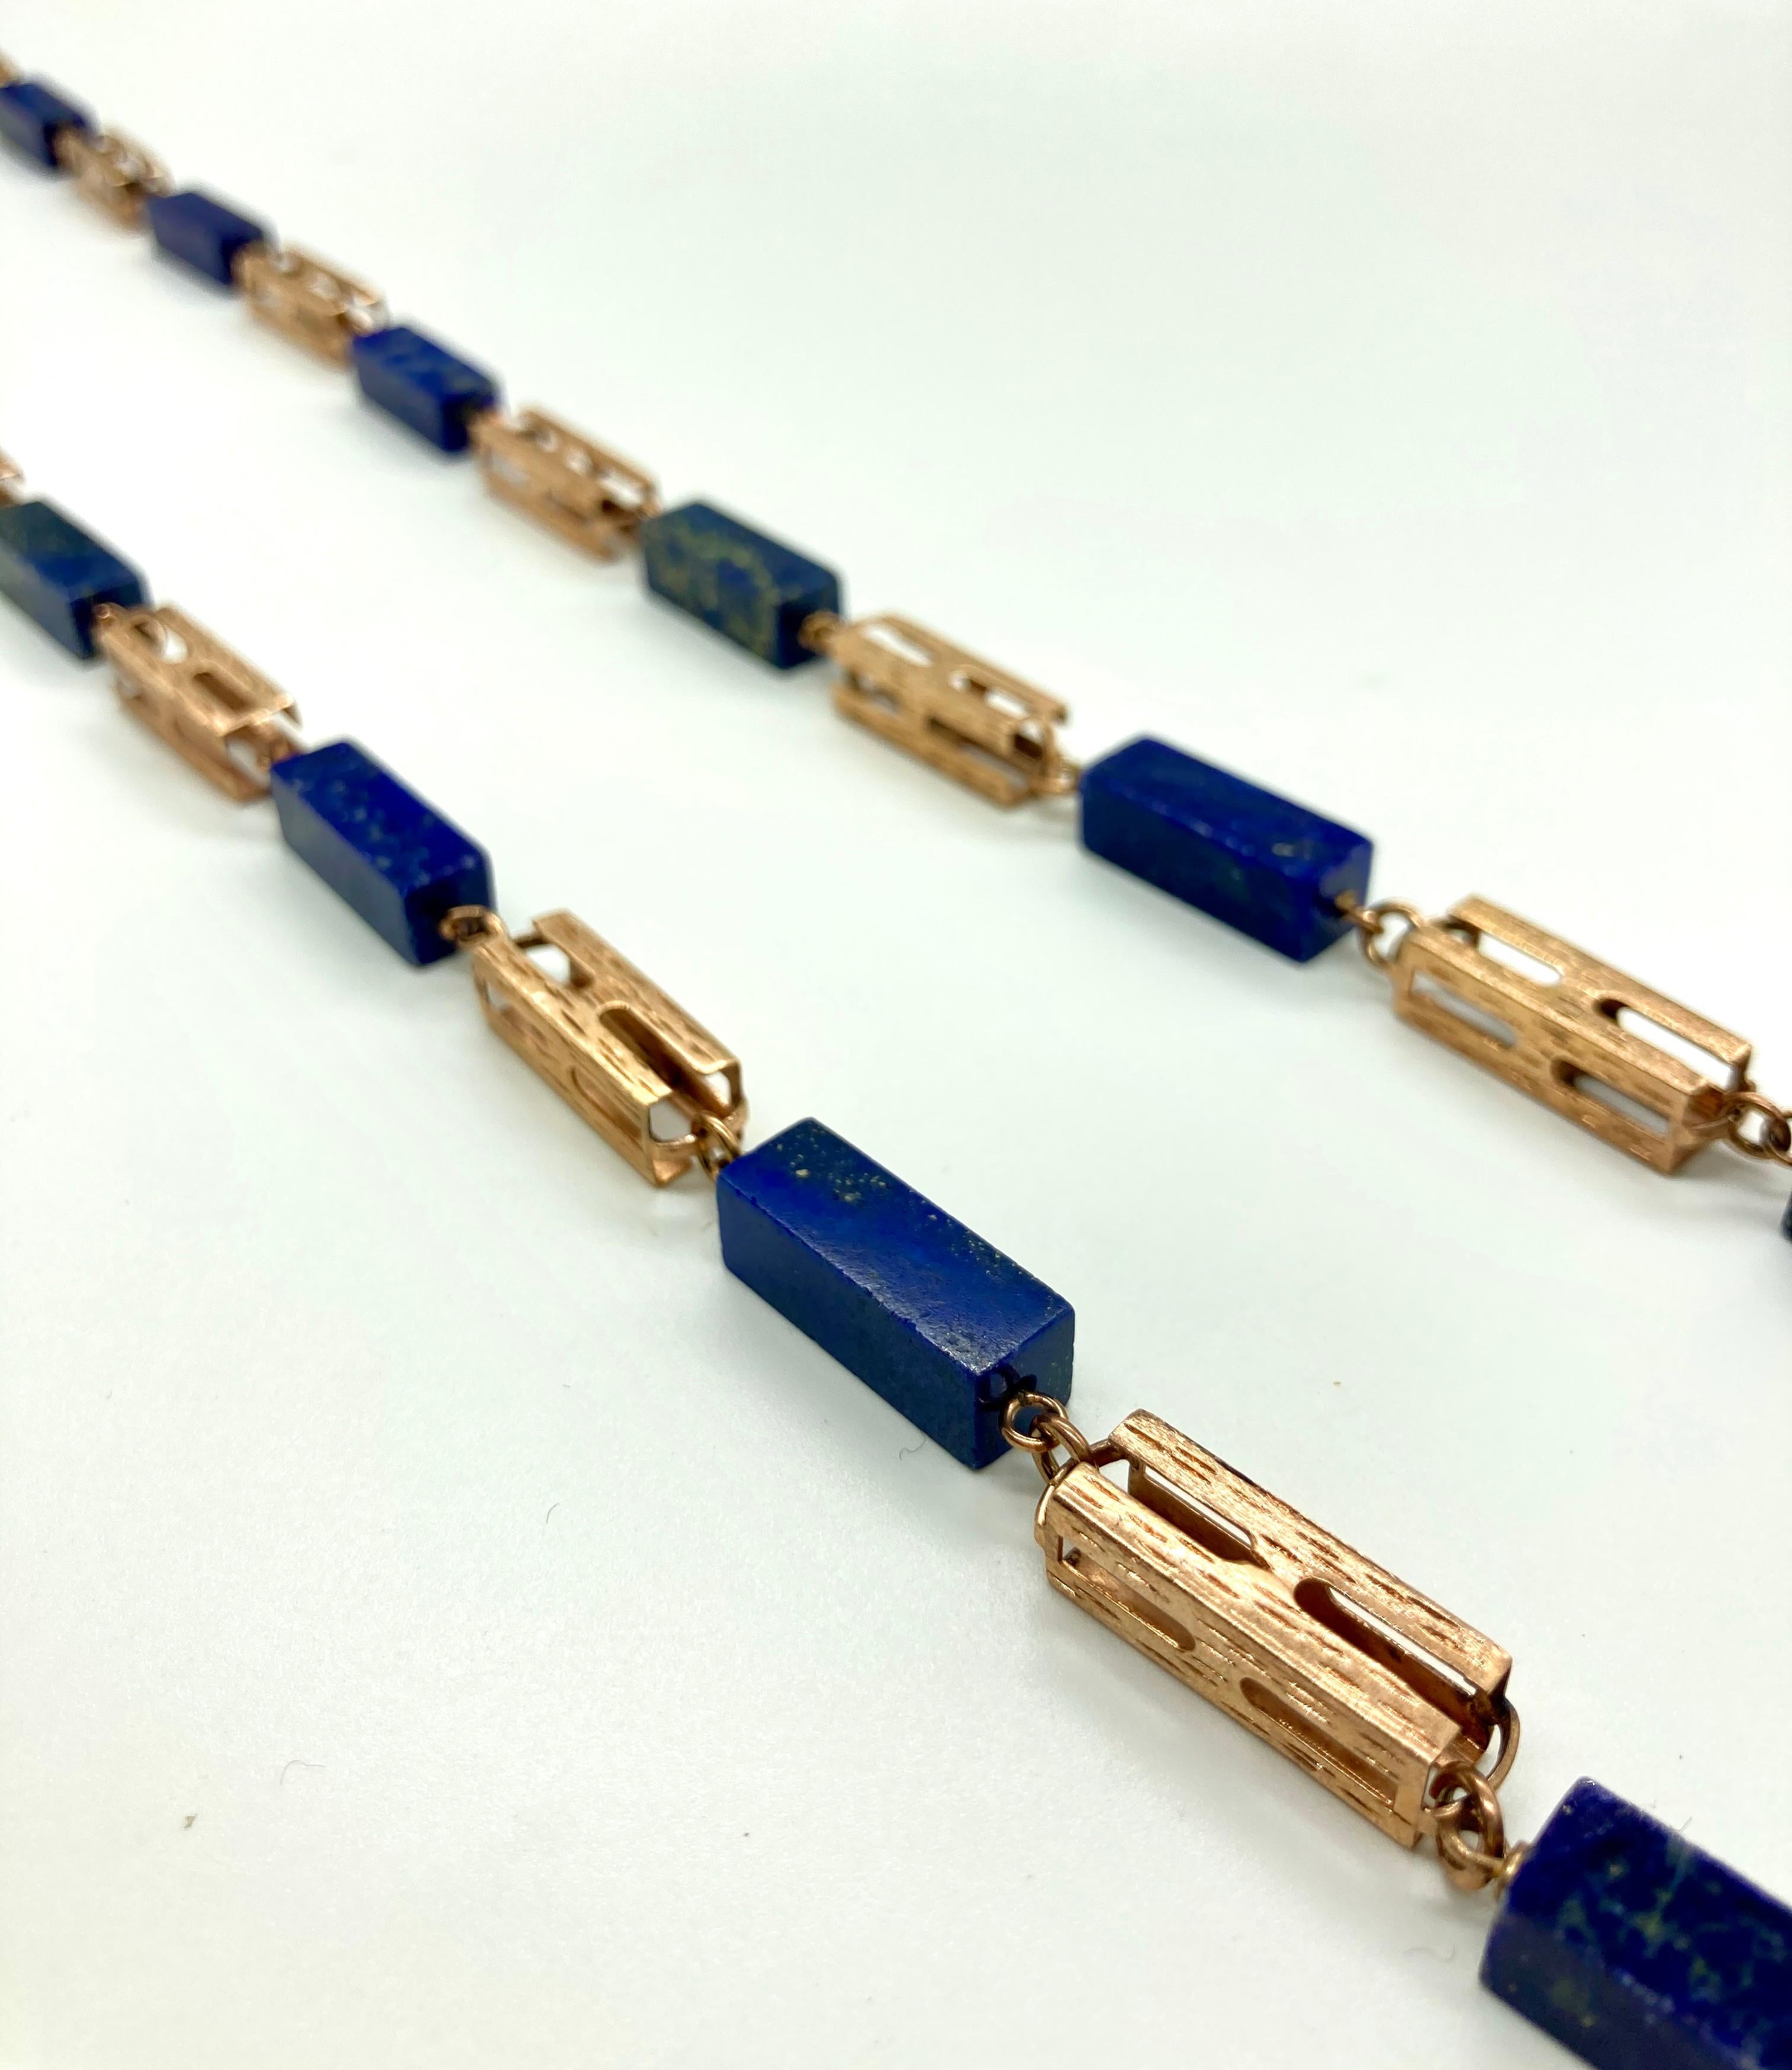 A beautiful antique nineteenth century long chain in 14 karat rose gold and lapis. Measures 40 inches long and weighs 96 grams.